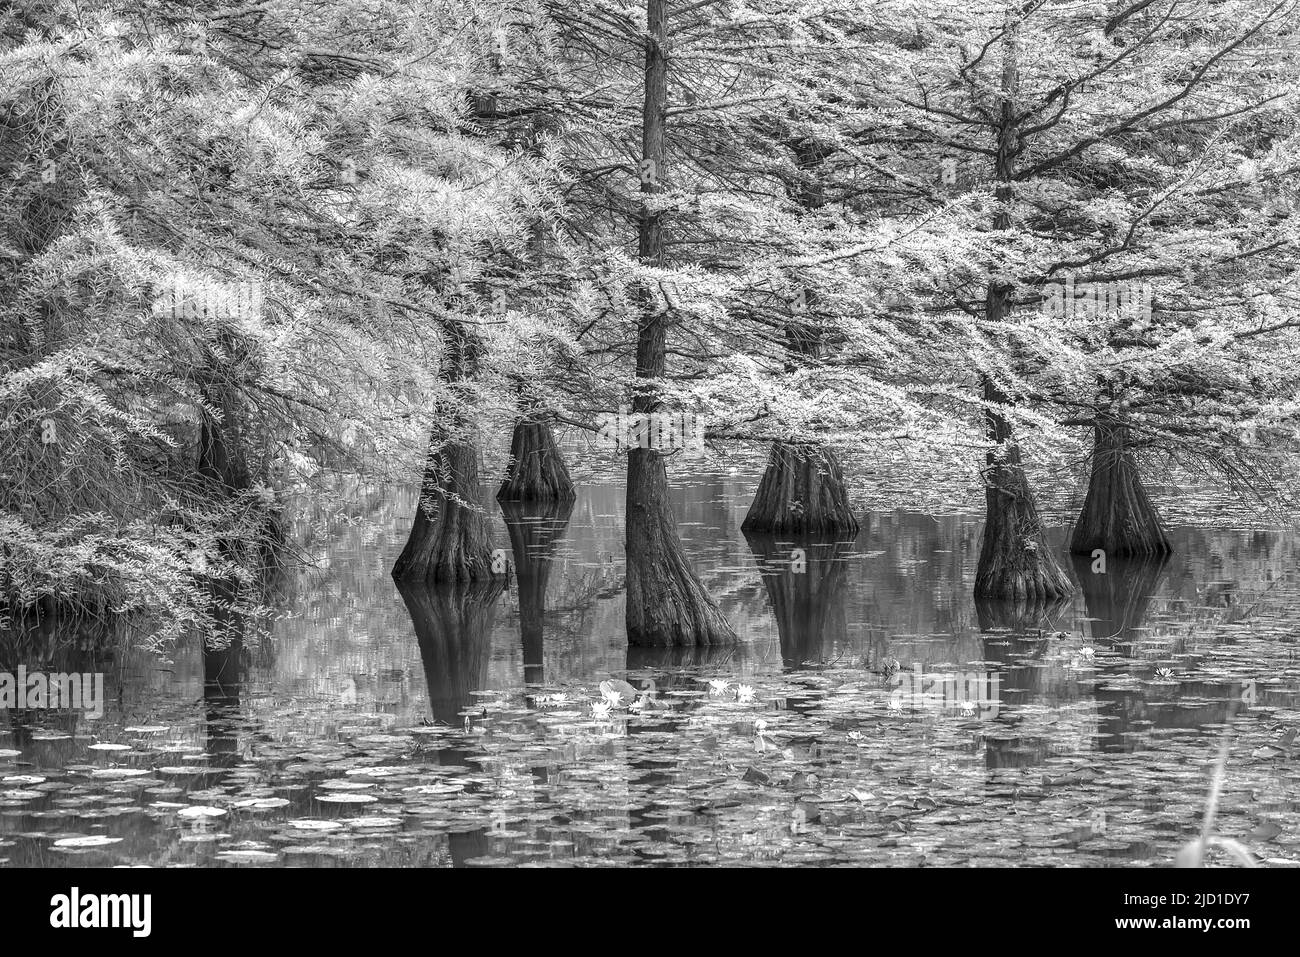 Bald cypress (Taxodium distichum) in water, infrared, Dennenlohe Castle Park, Middle Franconia Bavaria, Germany Stock Photo